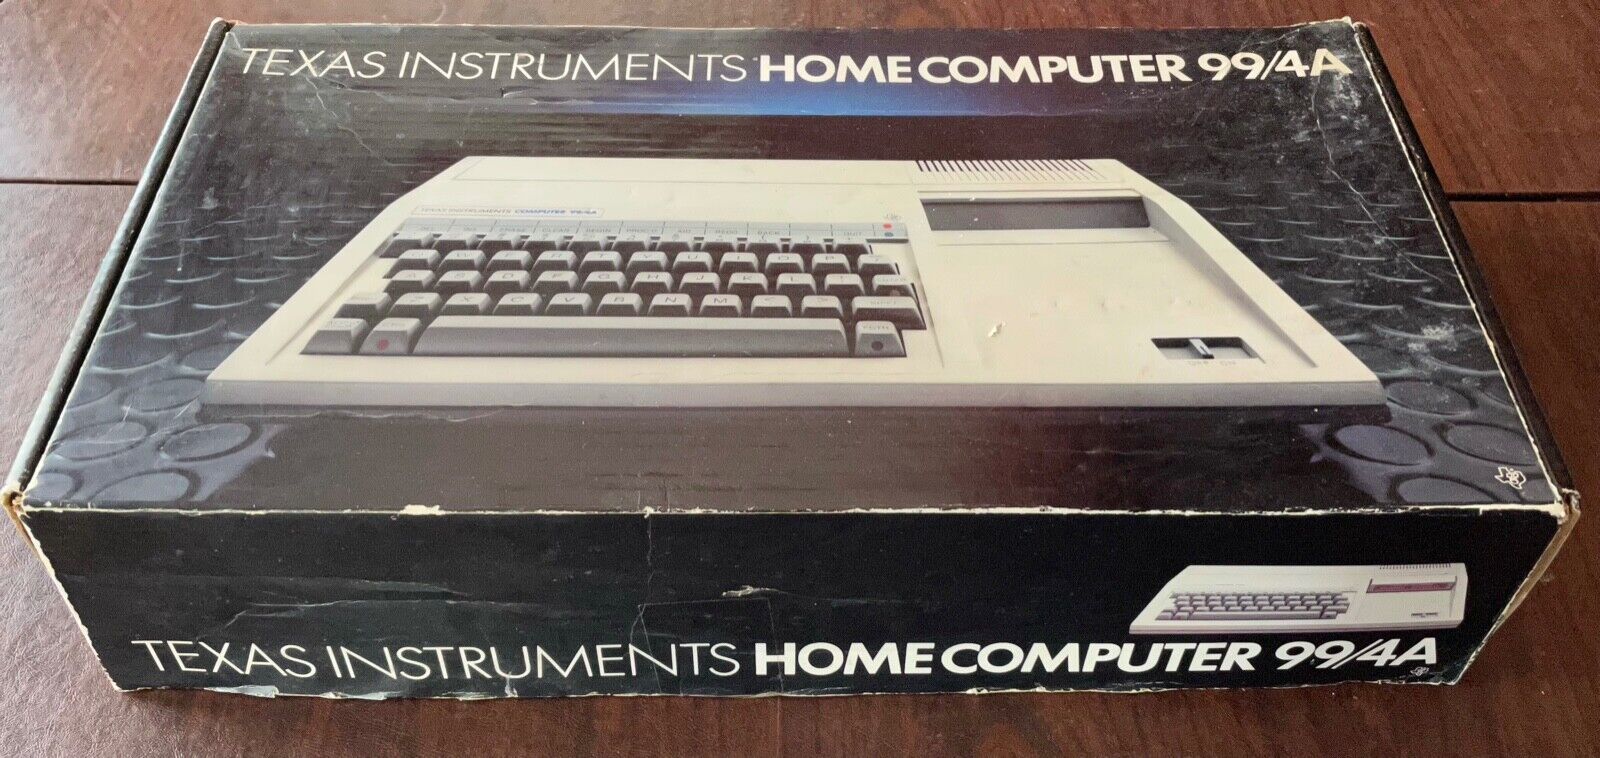 Texas Instruments 99/4A Home Computer Bundle with 13 Games 1984 Manuals Console